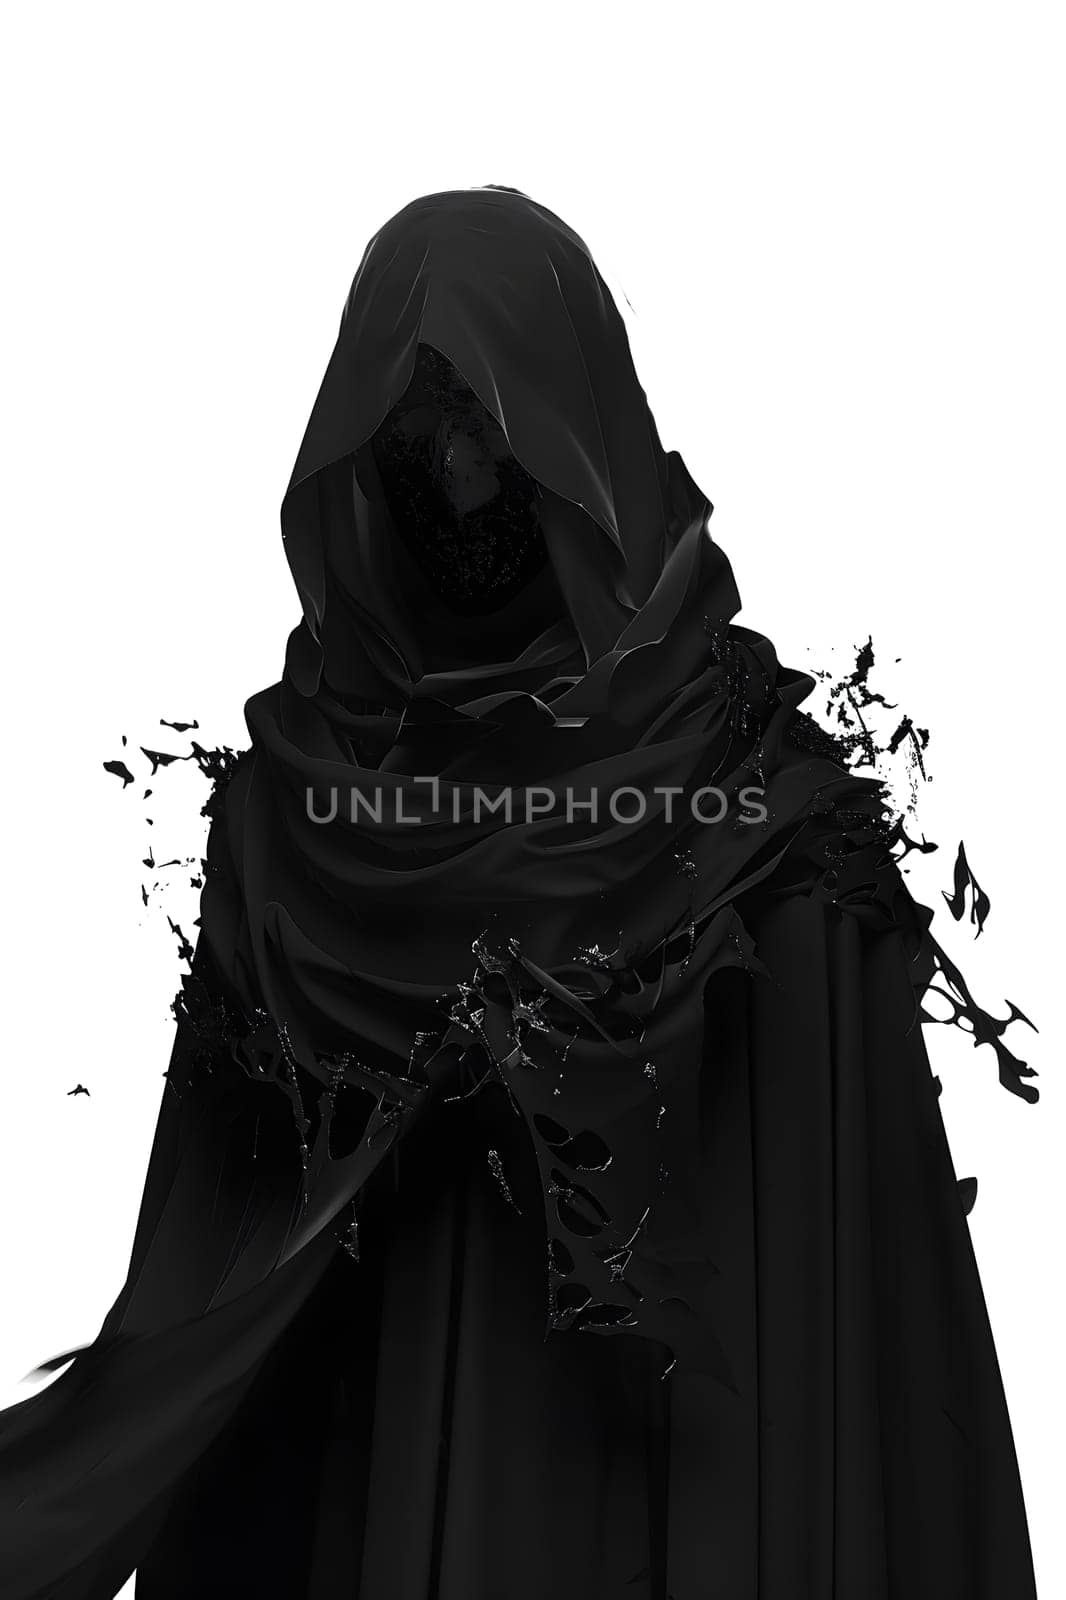 The sculpture depicts the grim reaper in a black cape and hood by Nadtochiy